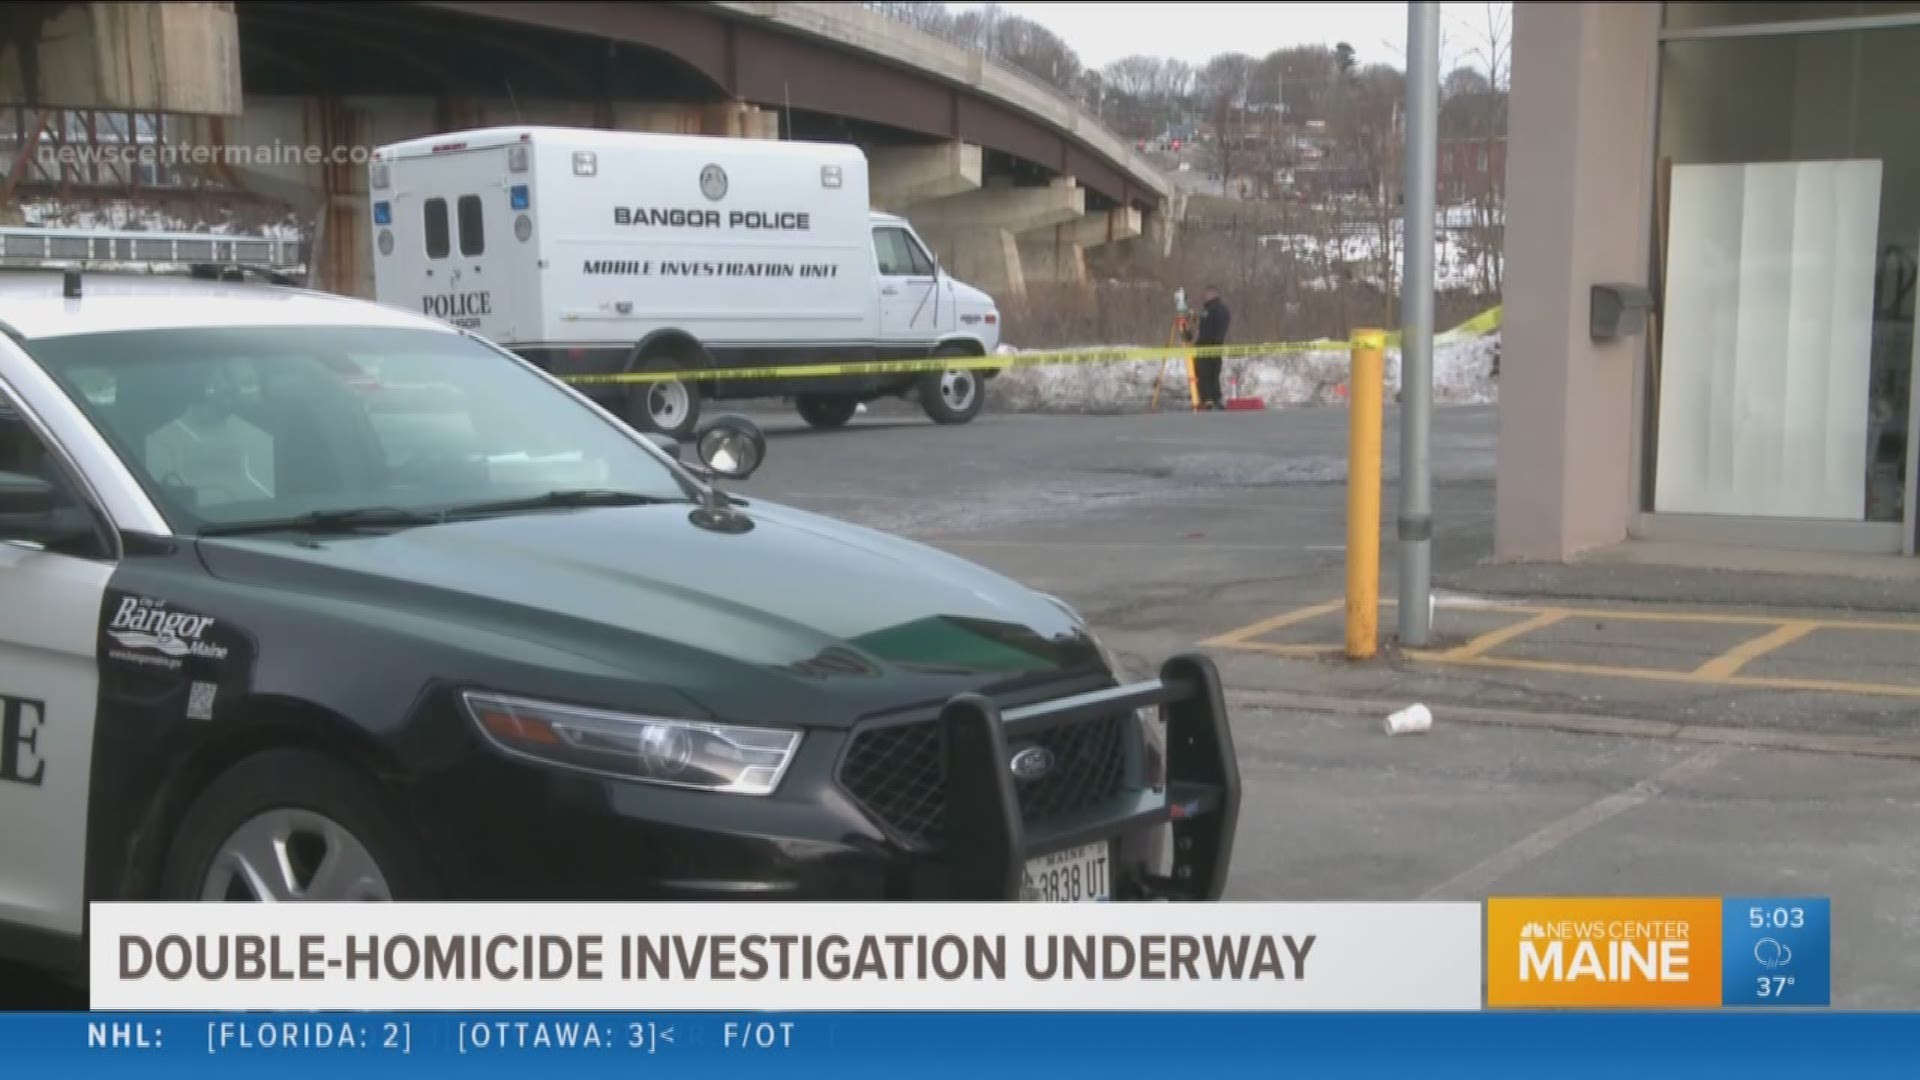 The latest on double-murder in Bangor